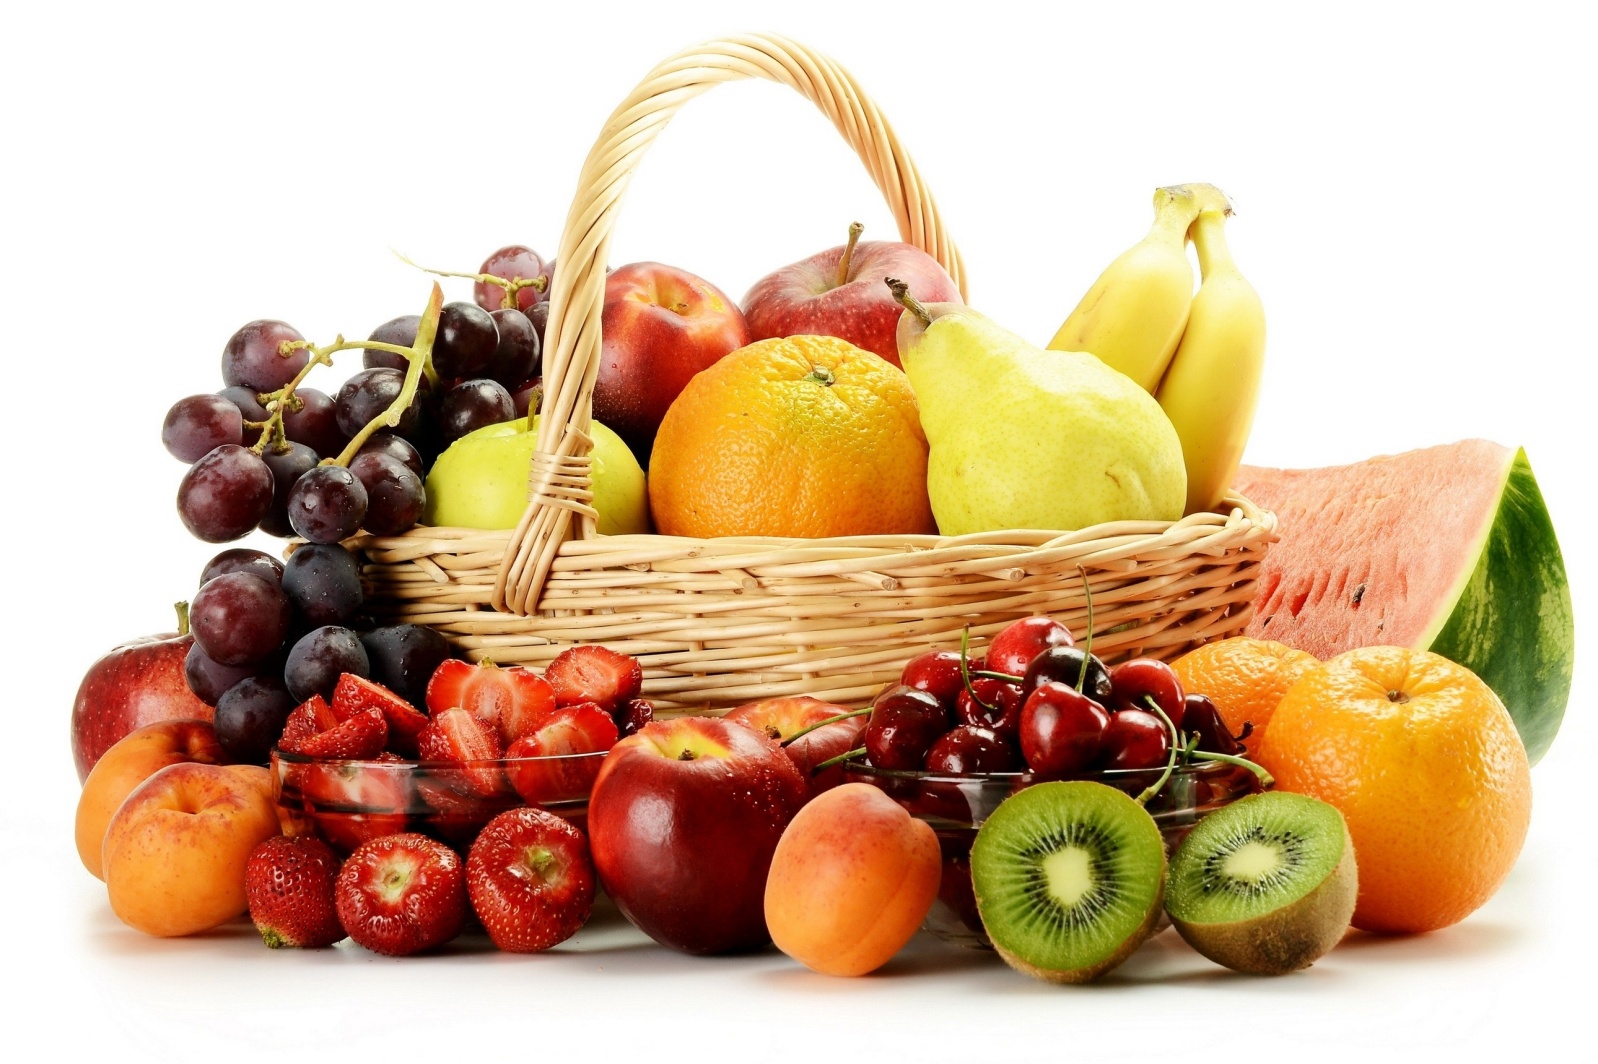 Z:\638-20190330\Final\B Section\B23-31 health\does-fruit-cause-weight-gain.jpg